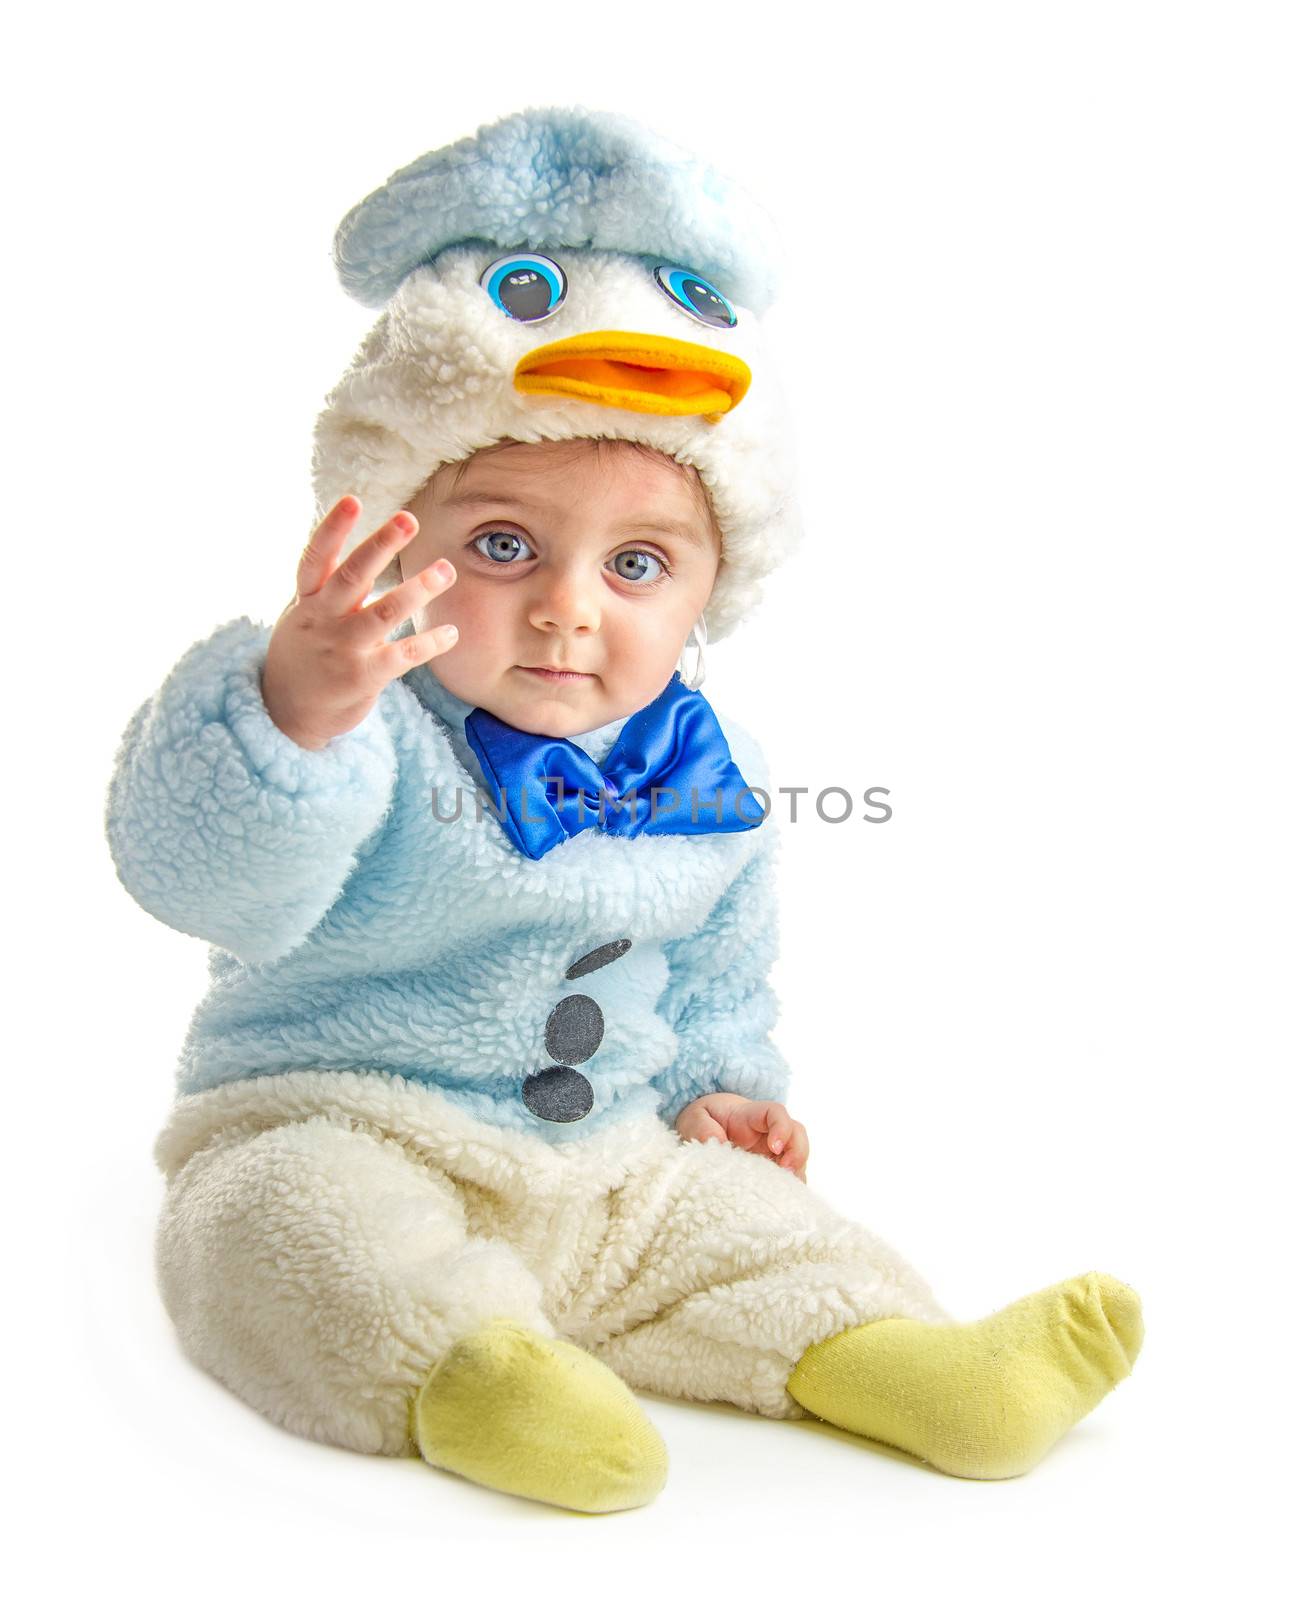 Baby in duck suit posing at camera on white background